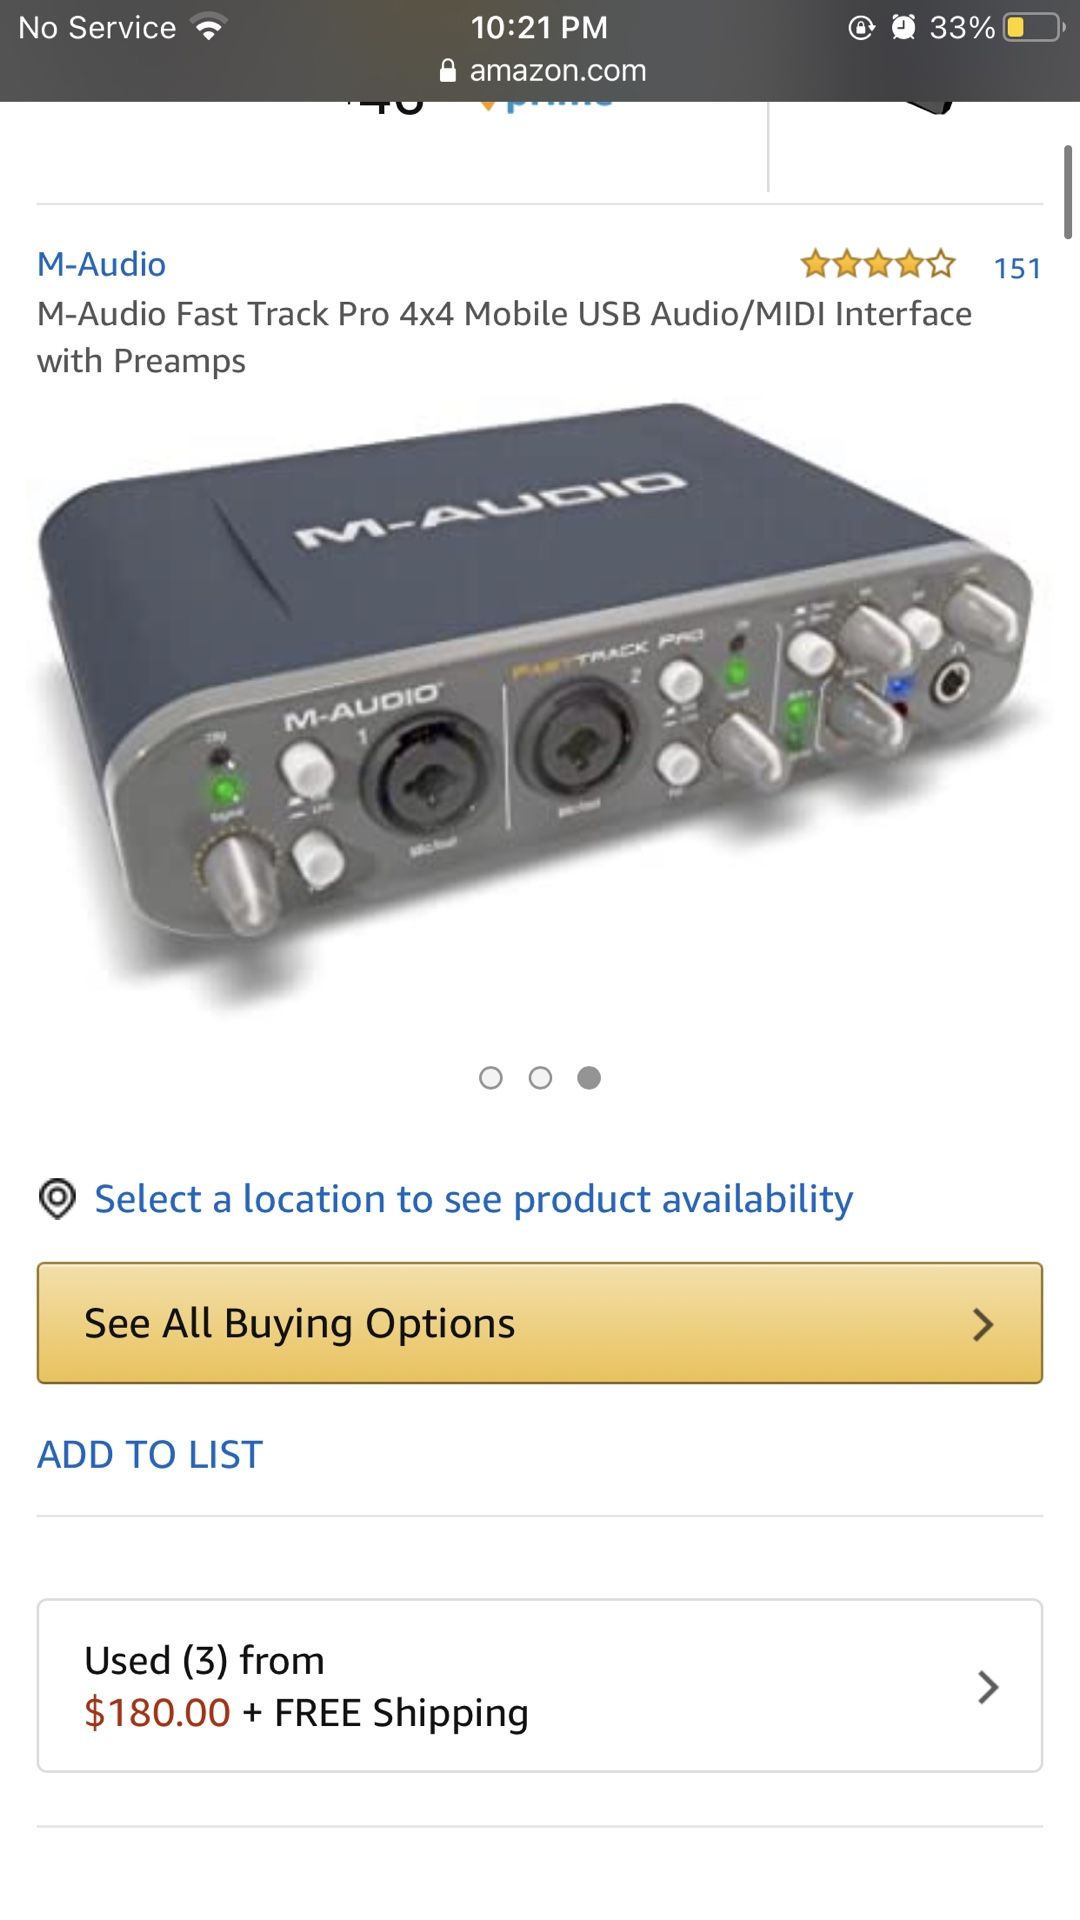 M-Audio FastTrack pro 4x4 mobile usb/midi interface with preamps